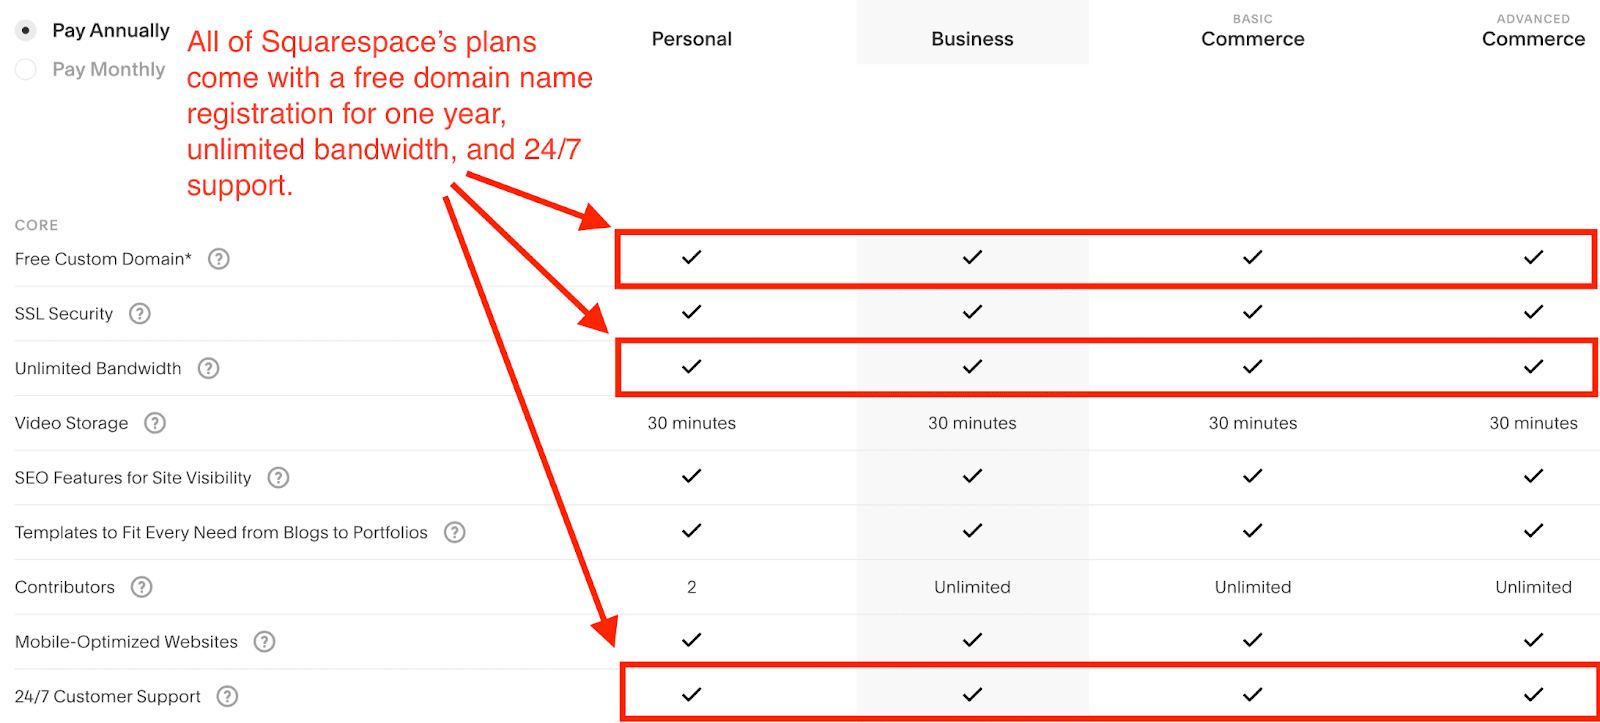 Squarespace plan features table